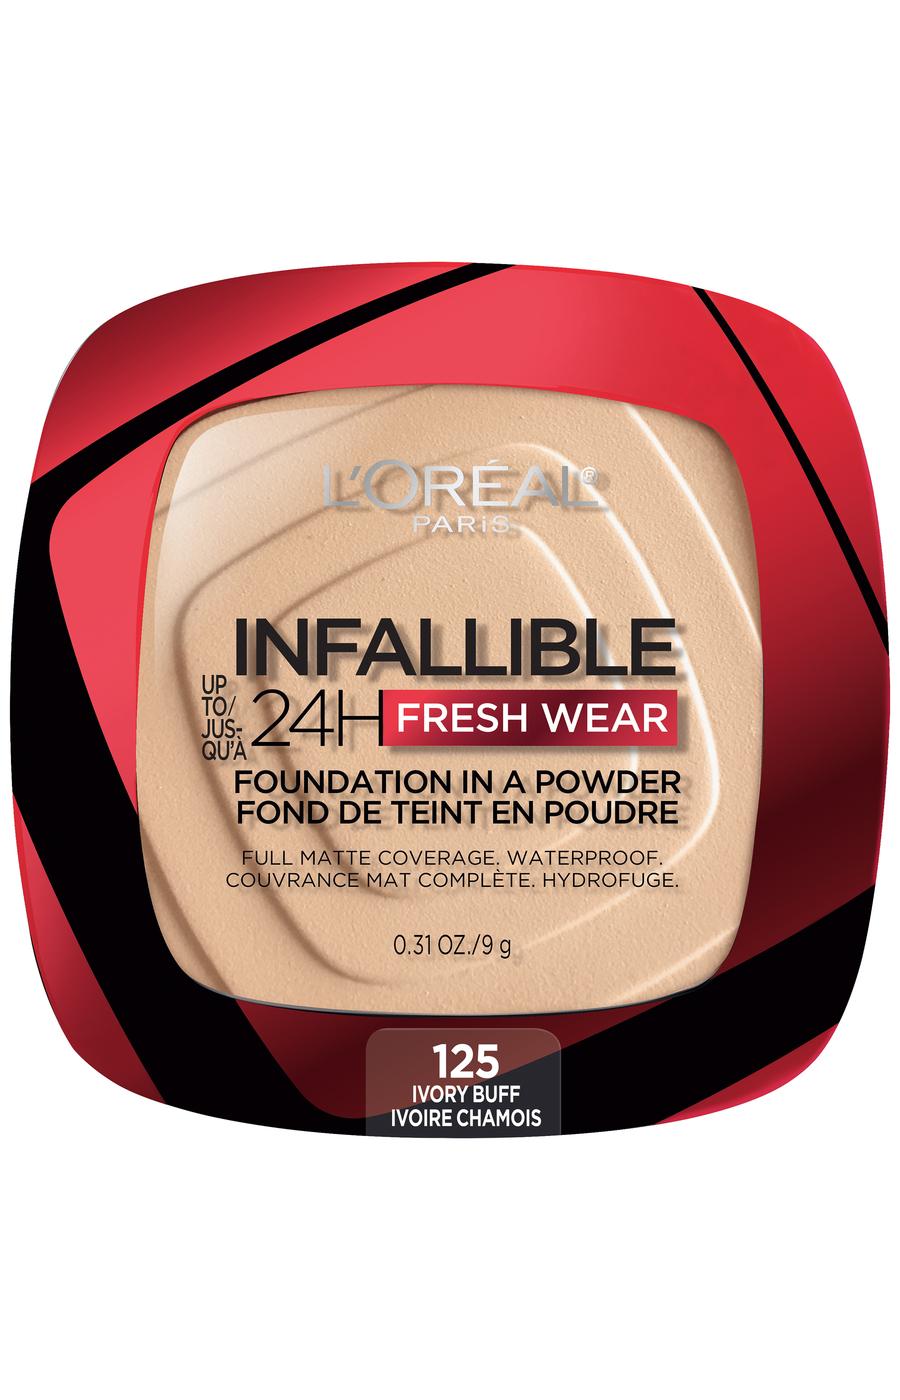 L'Oréal Paris Infallible Up to 24H Fresh Wear Foundation in a Powder Ivory Buff; image 1 of 4